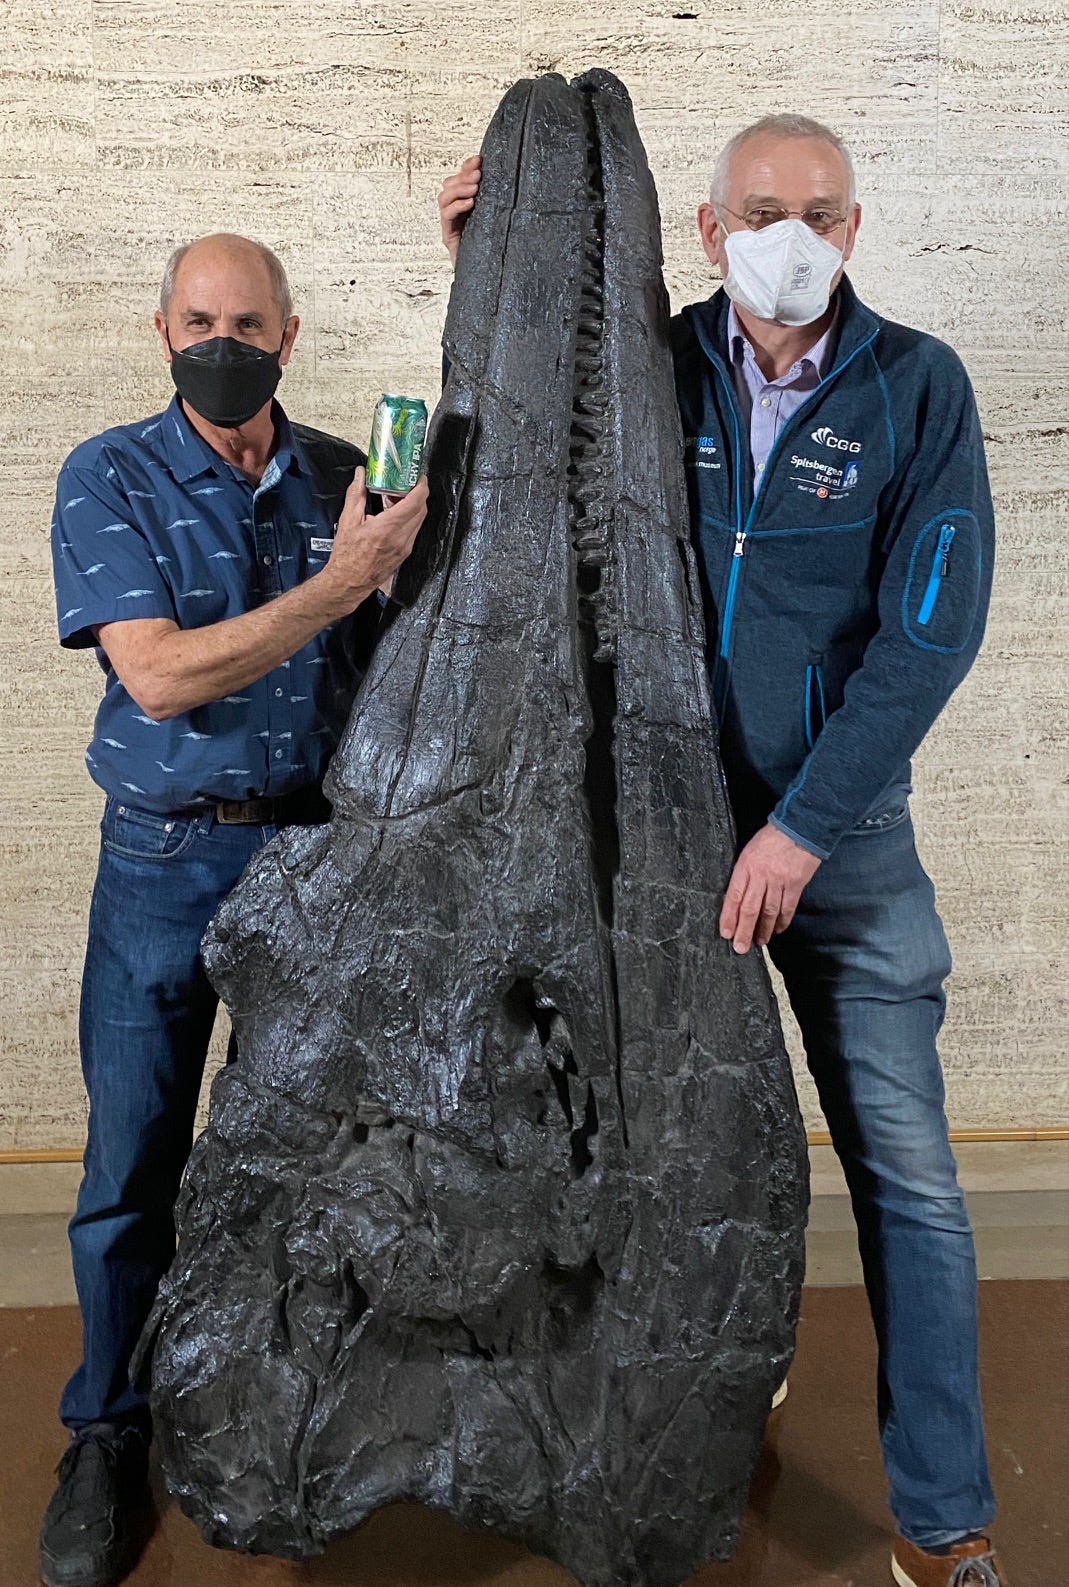 Ichthyosaur fossil found in Nevada named for brewery founder